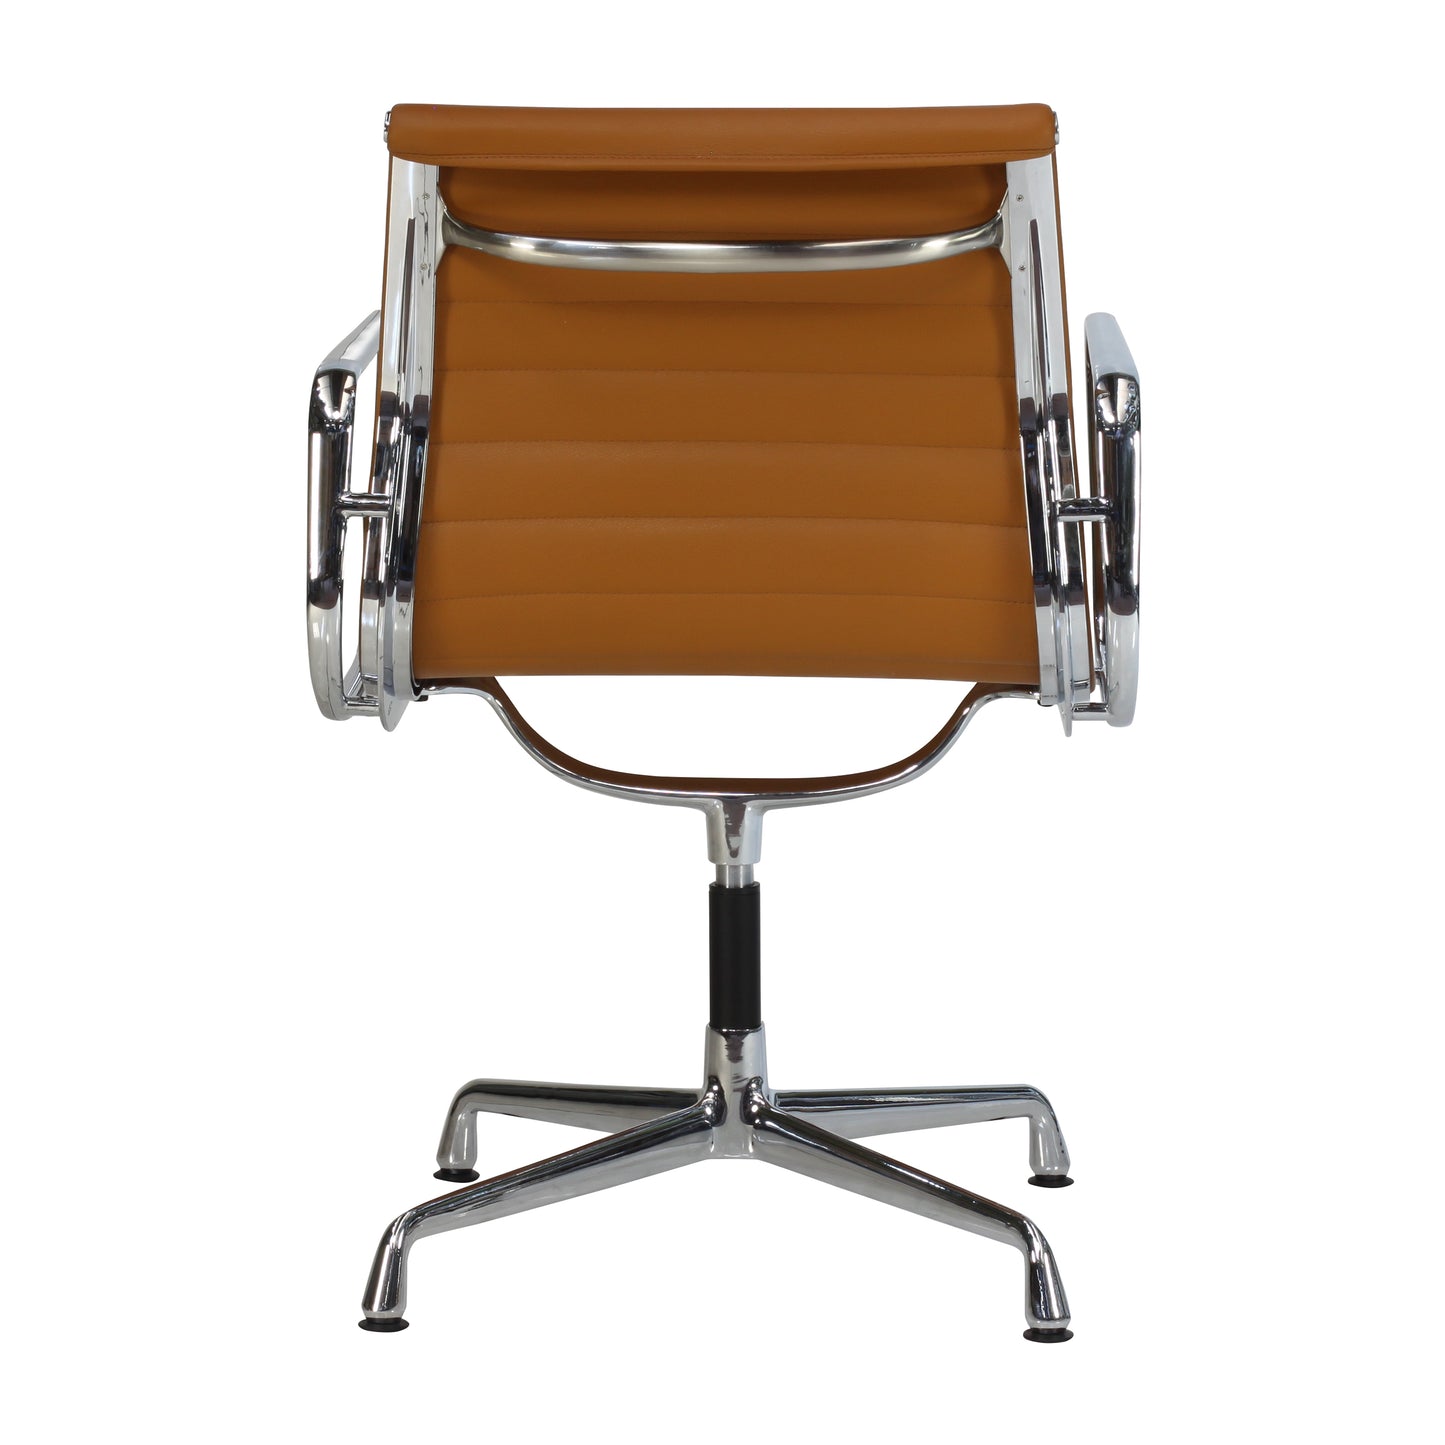 Chair without wheels aluminium style | Cognac Leather | Back